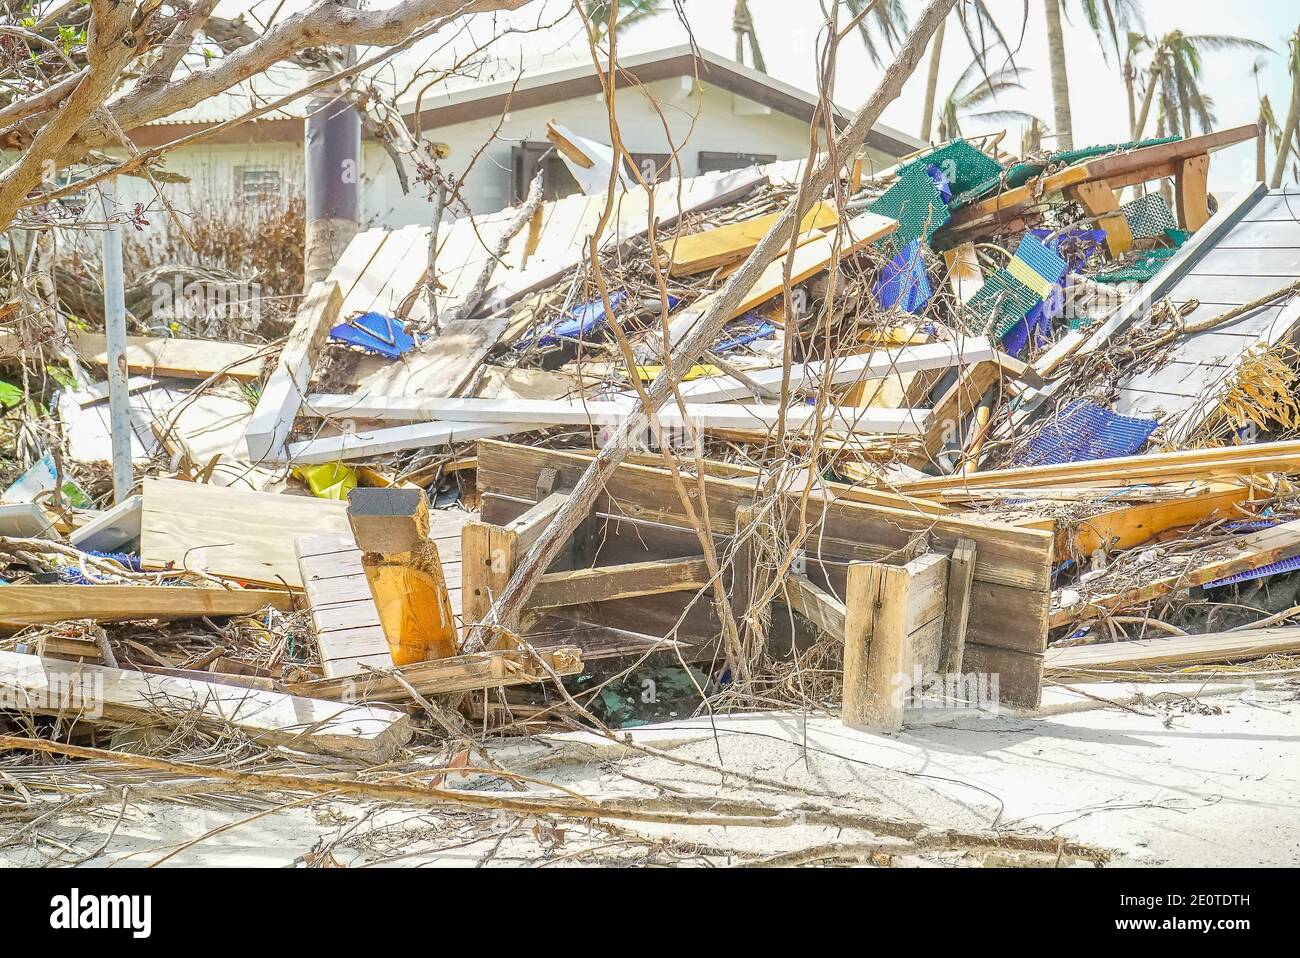 Severe property damage cause by hurricane Irma that hit the island of St.maarten in 2017 Stock Photo